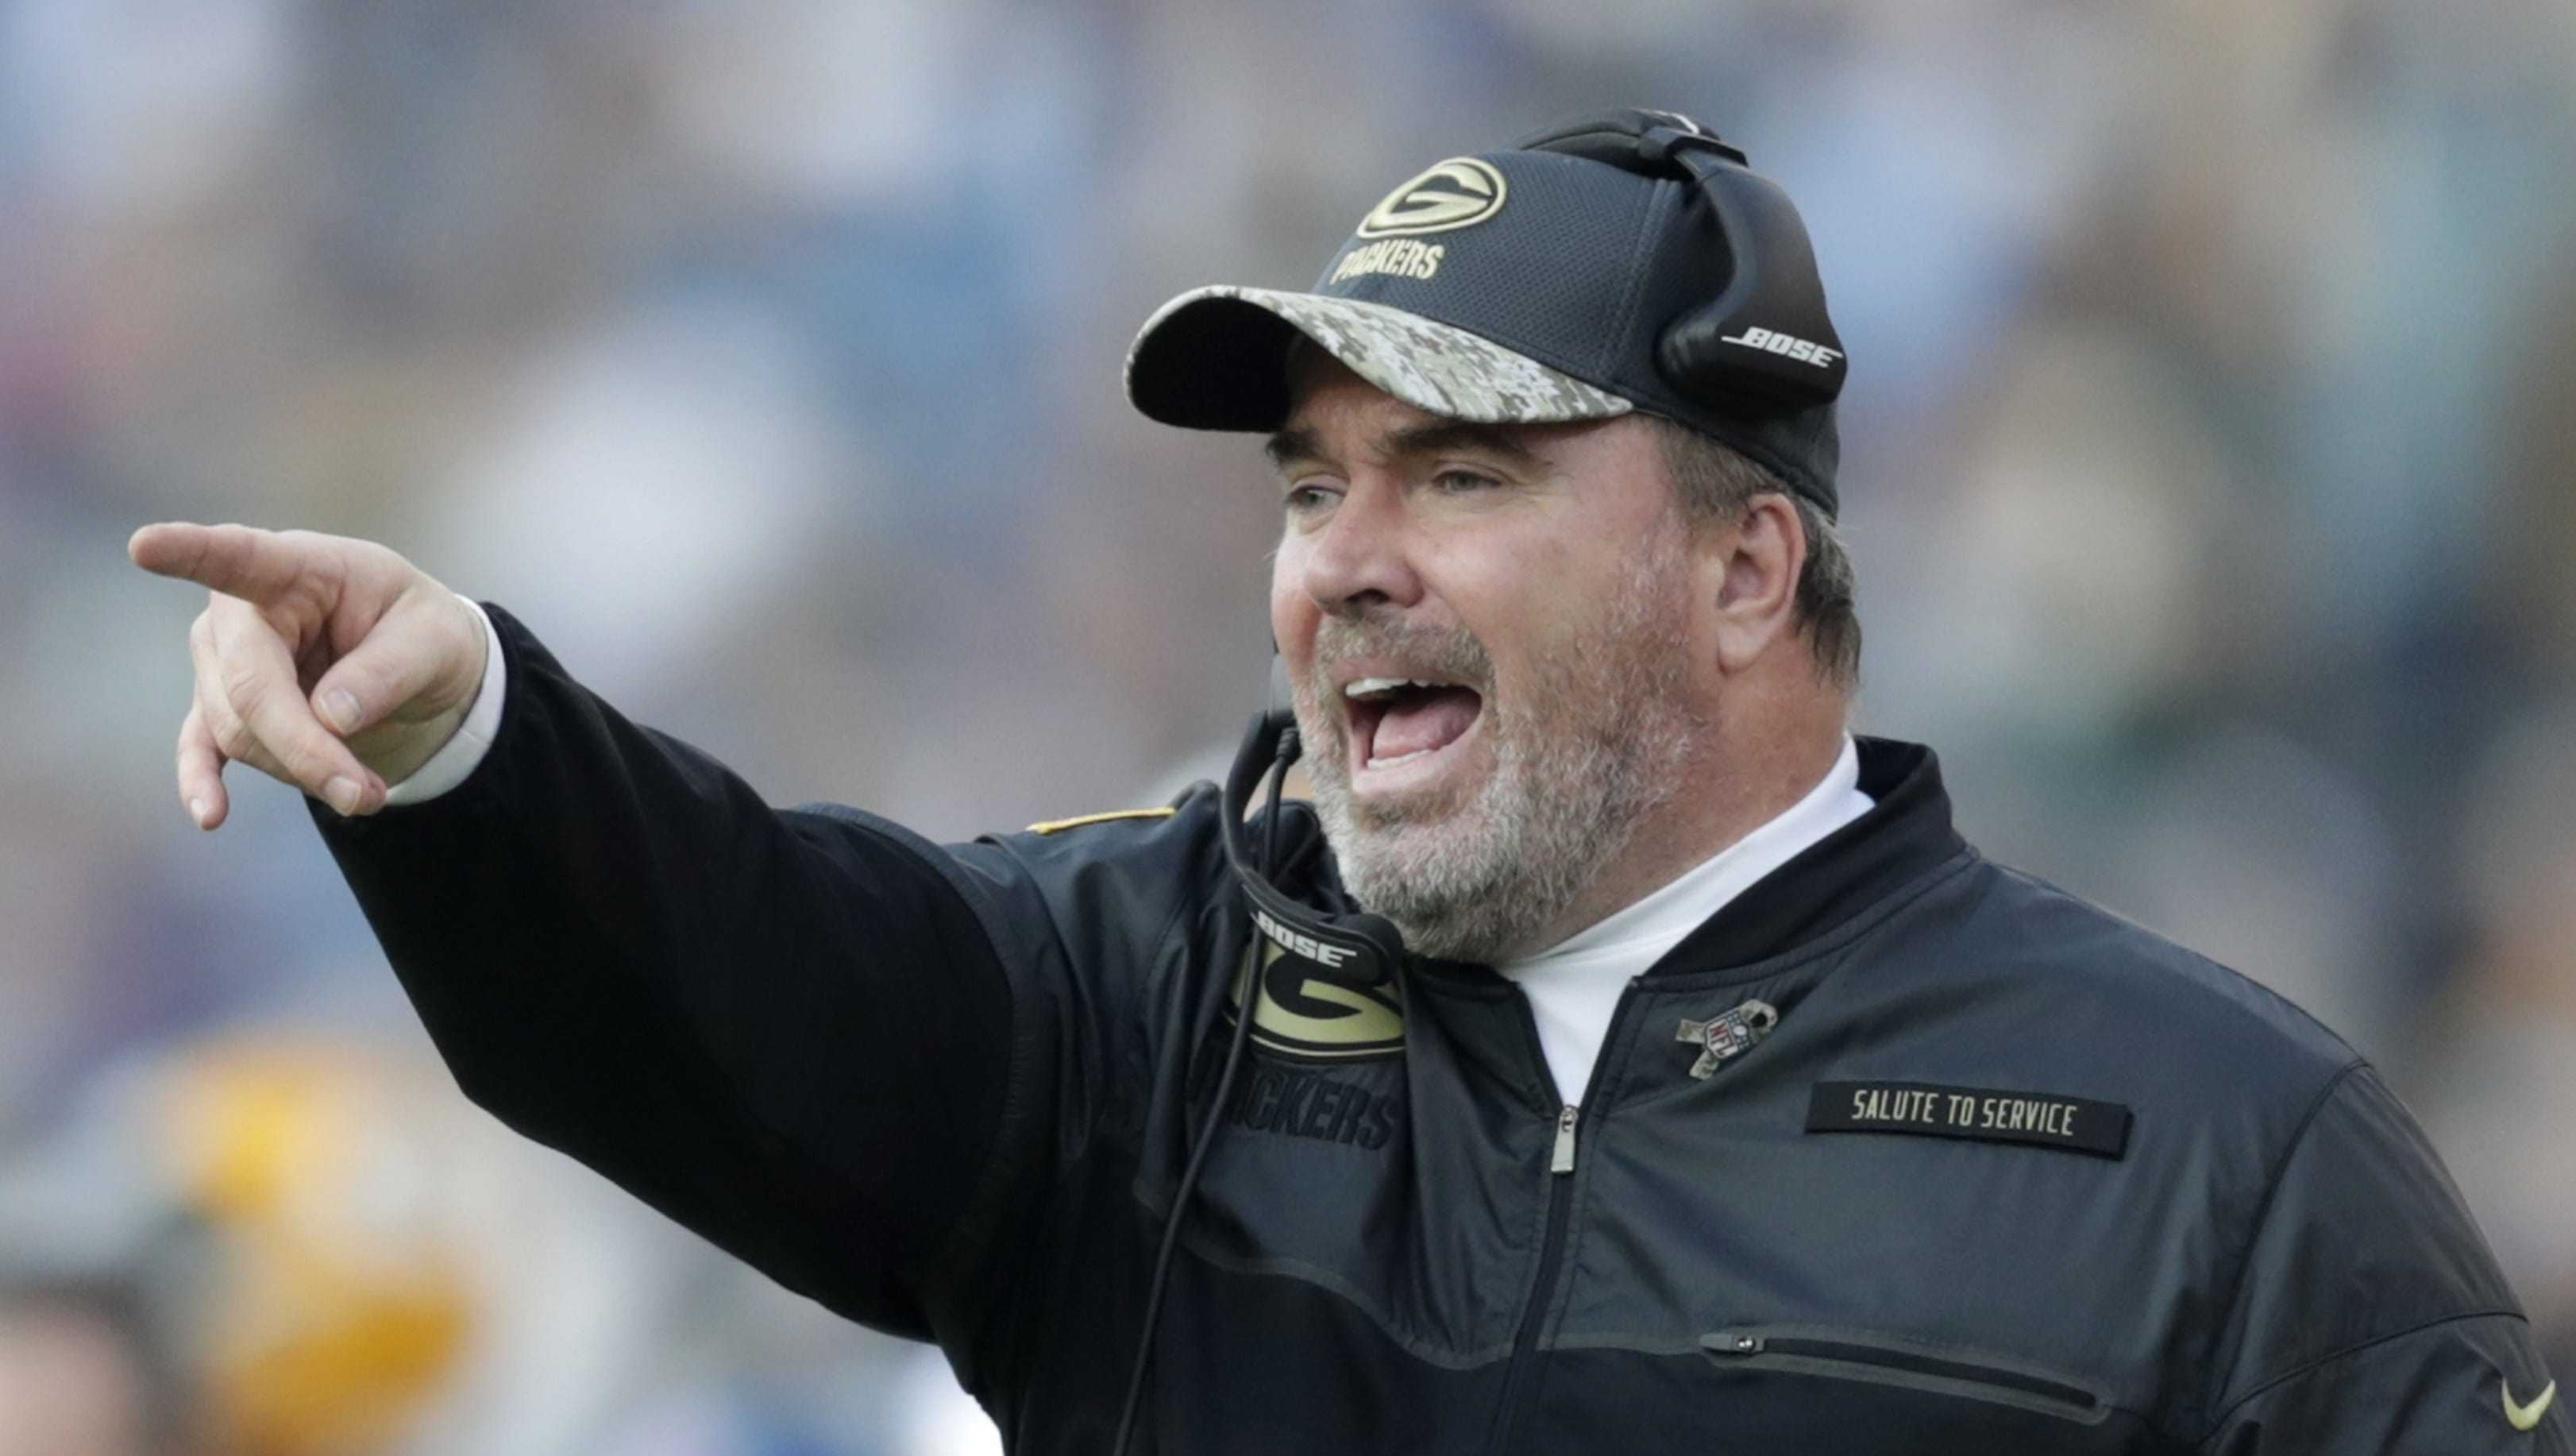 Green Bay Packers coach Mike McCarthy yells out to the field during a stop in play during their game against the Tennessee Titans on Nov. 13, 2016, at Nissan Stadium in Nashville.